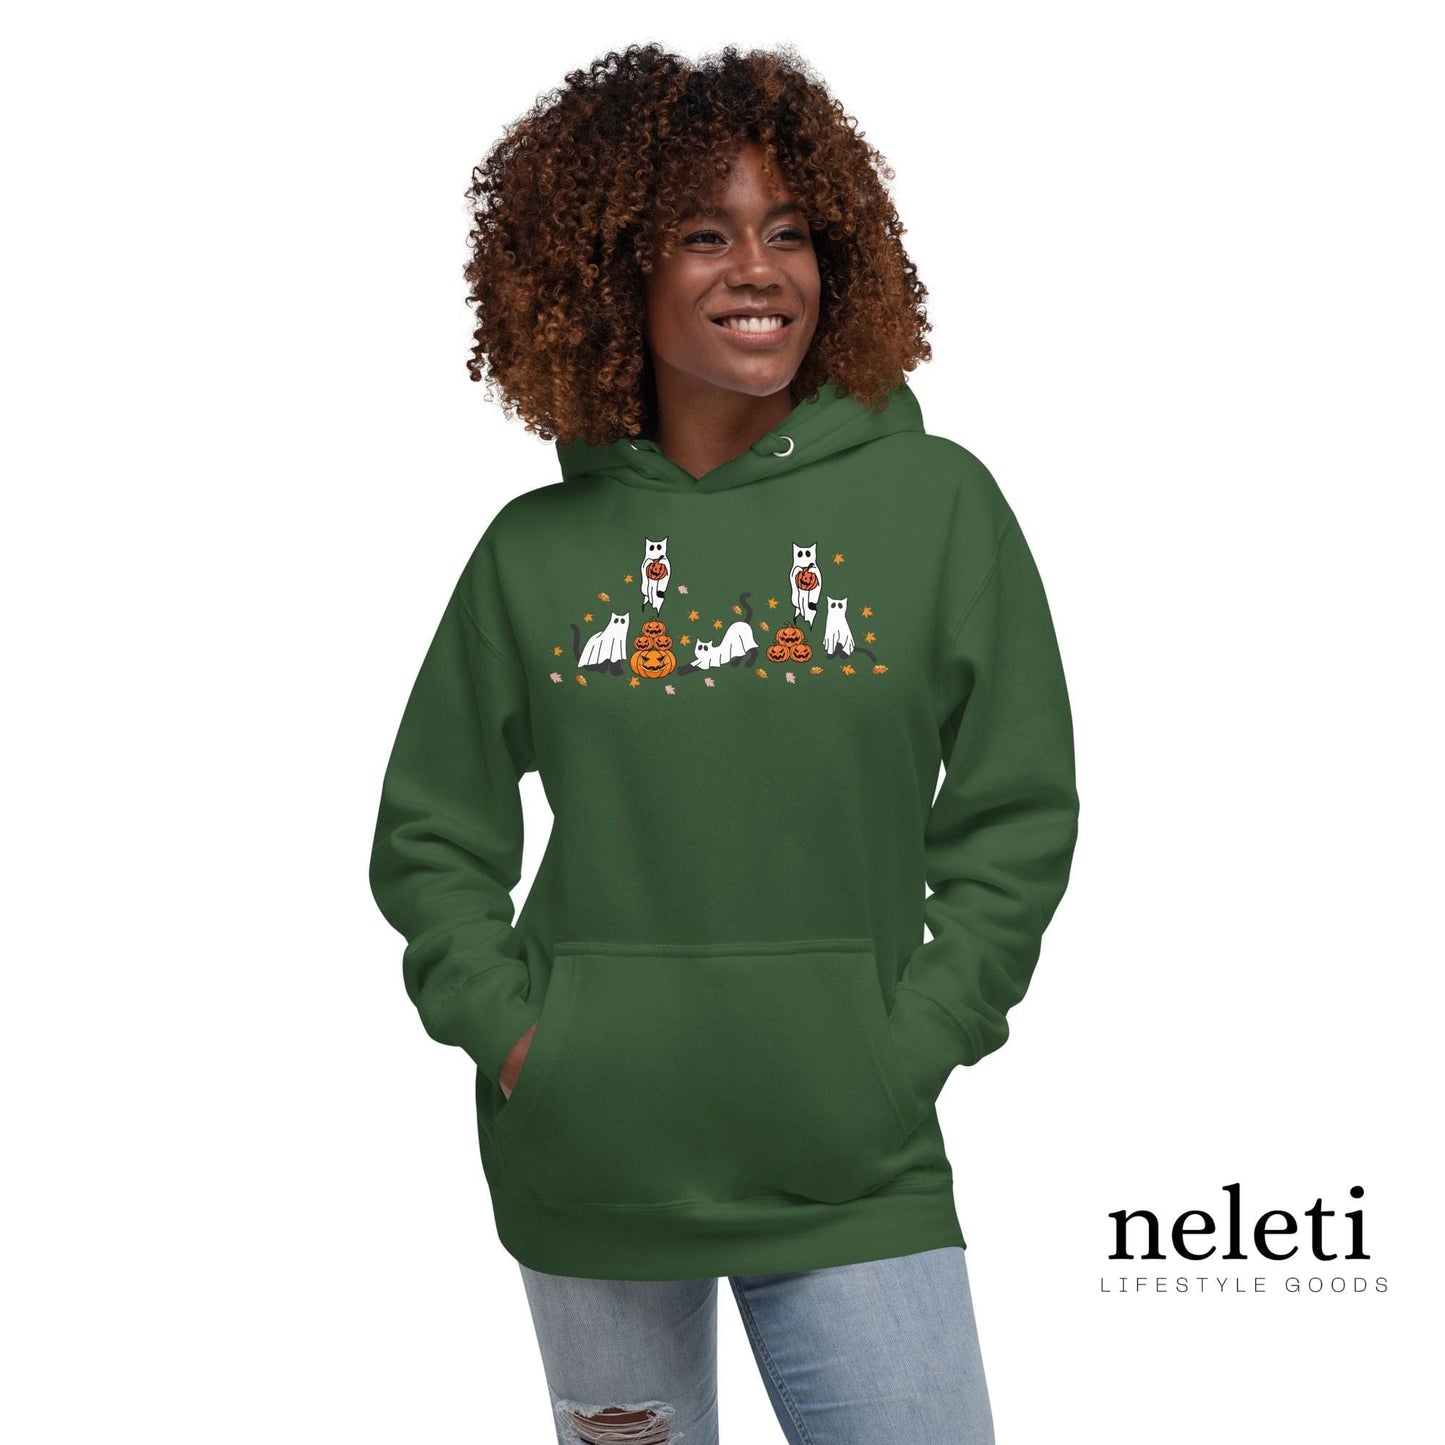 neleti.com-haloween-forest-green-hoodie-for-cat-lovers